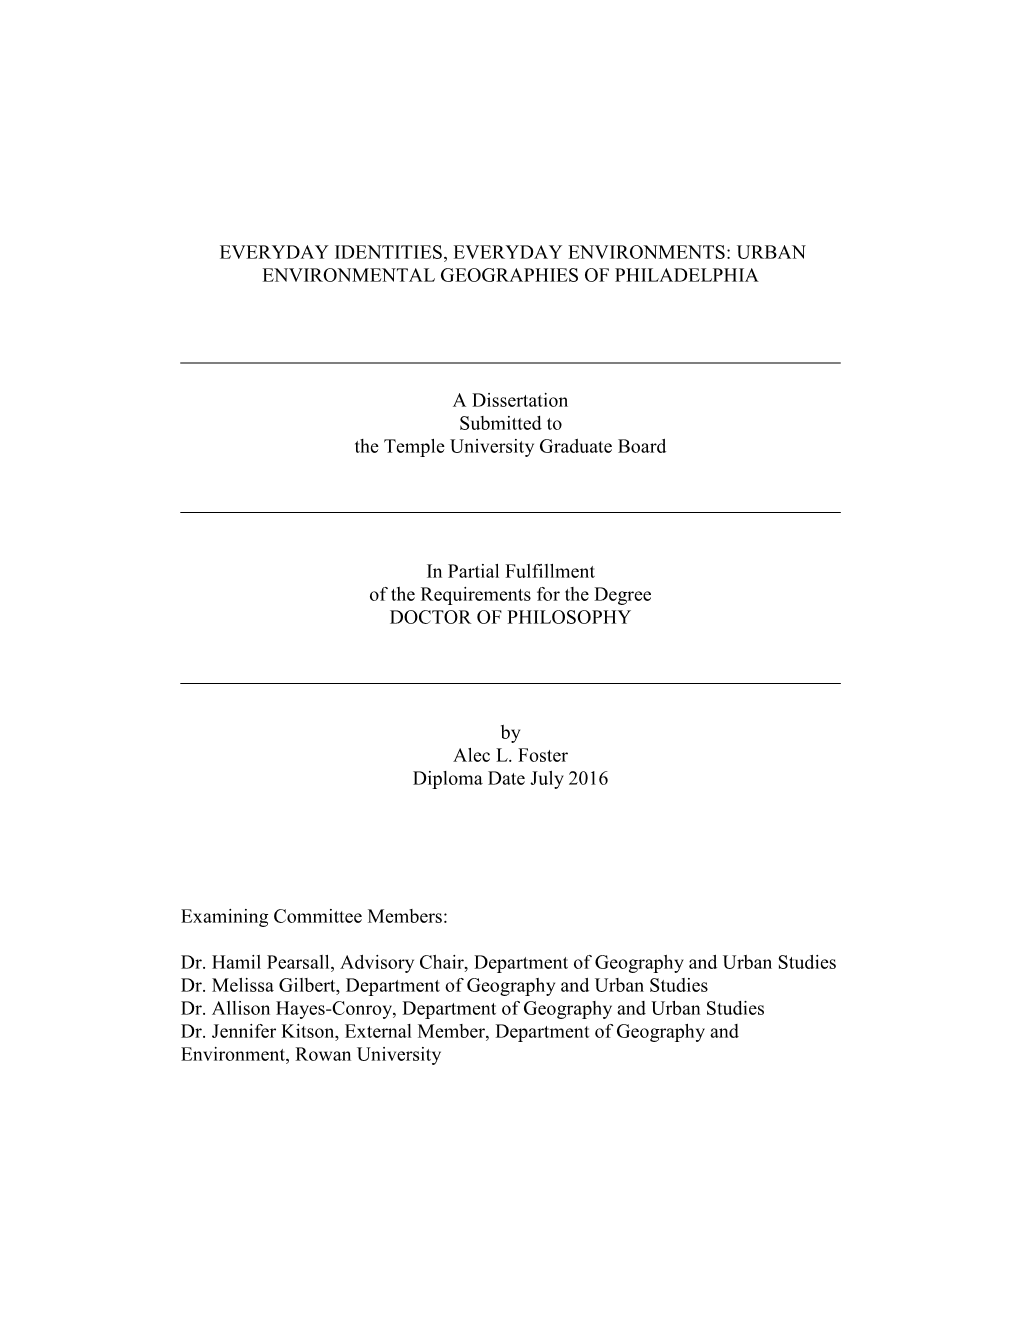 EVERYDAY IDENTITIES, EVERYDAY ENVIRONMENTS: URBAN ENVIRONMENTAL GEOGRAPHIES of PHILADELPHIA a Dissertation Submitted to the Temp